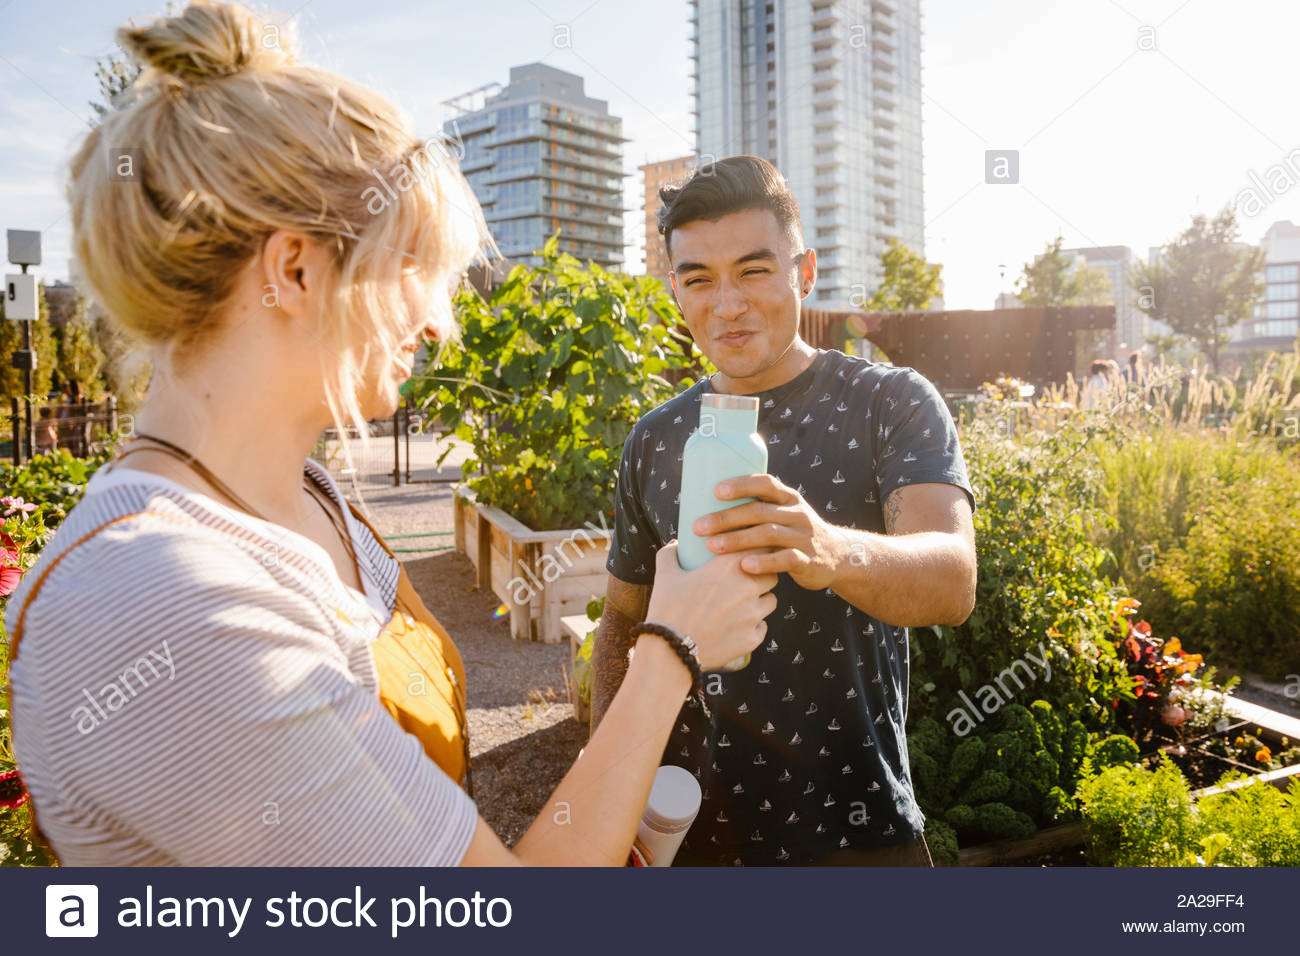 Happy young couple sharing water bottle in sunny, urban community garden Stock Photo